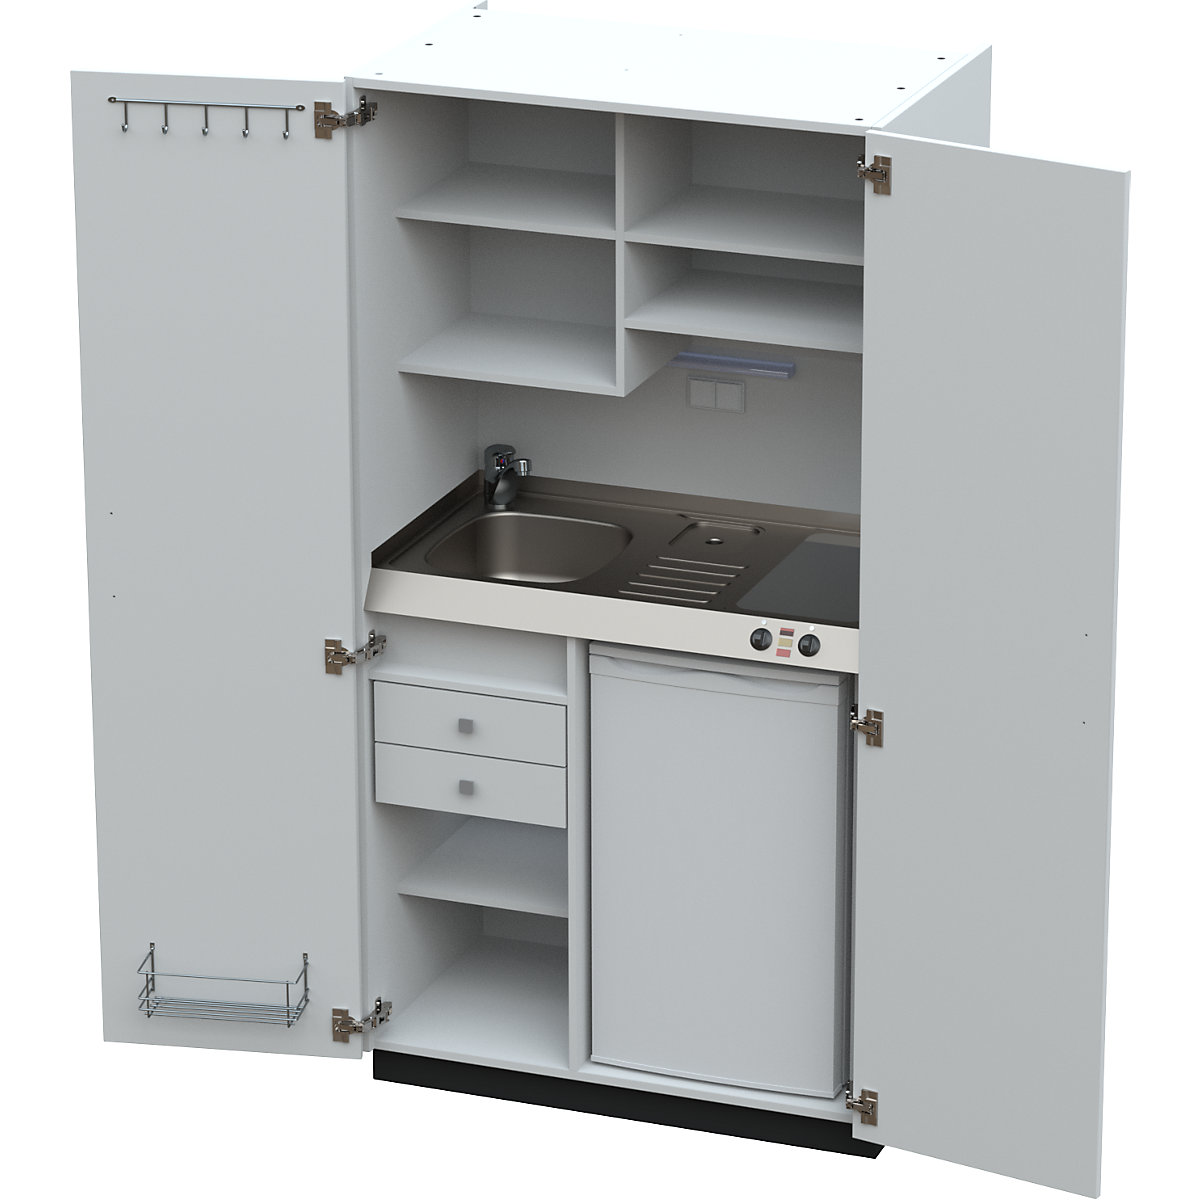 Kitchen unit with hinged doors, 2 glass ceramic hotplates, basin at left, white, 1956 x 1000 x 650 mm-12